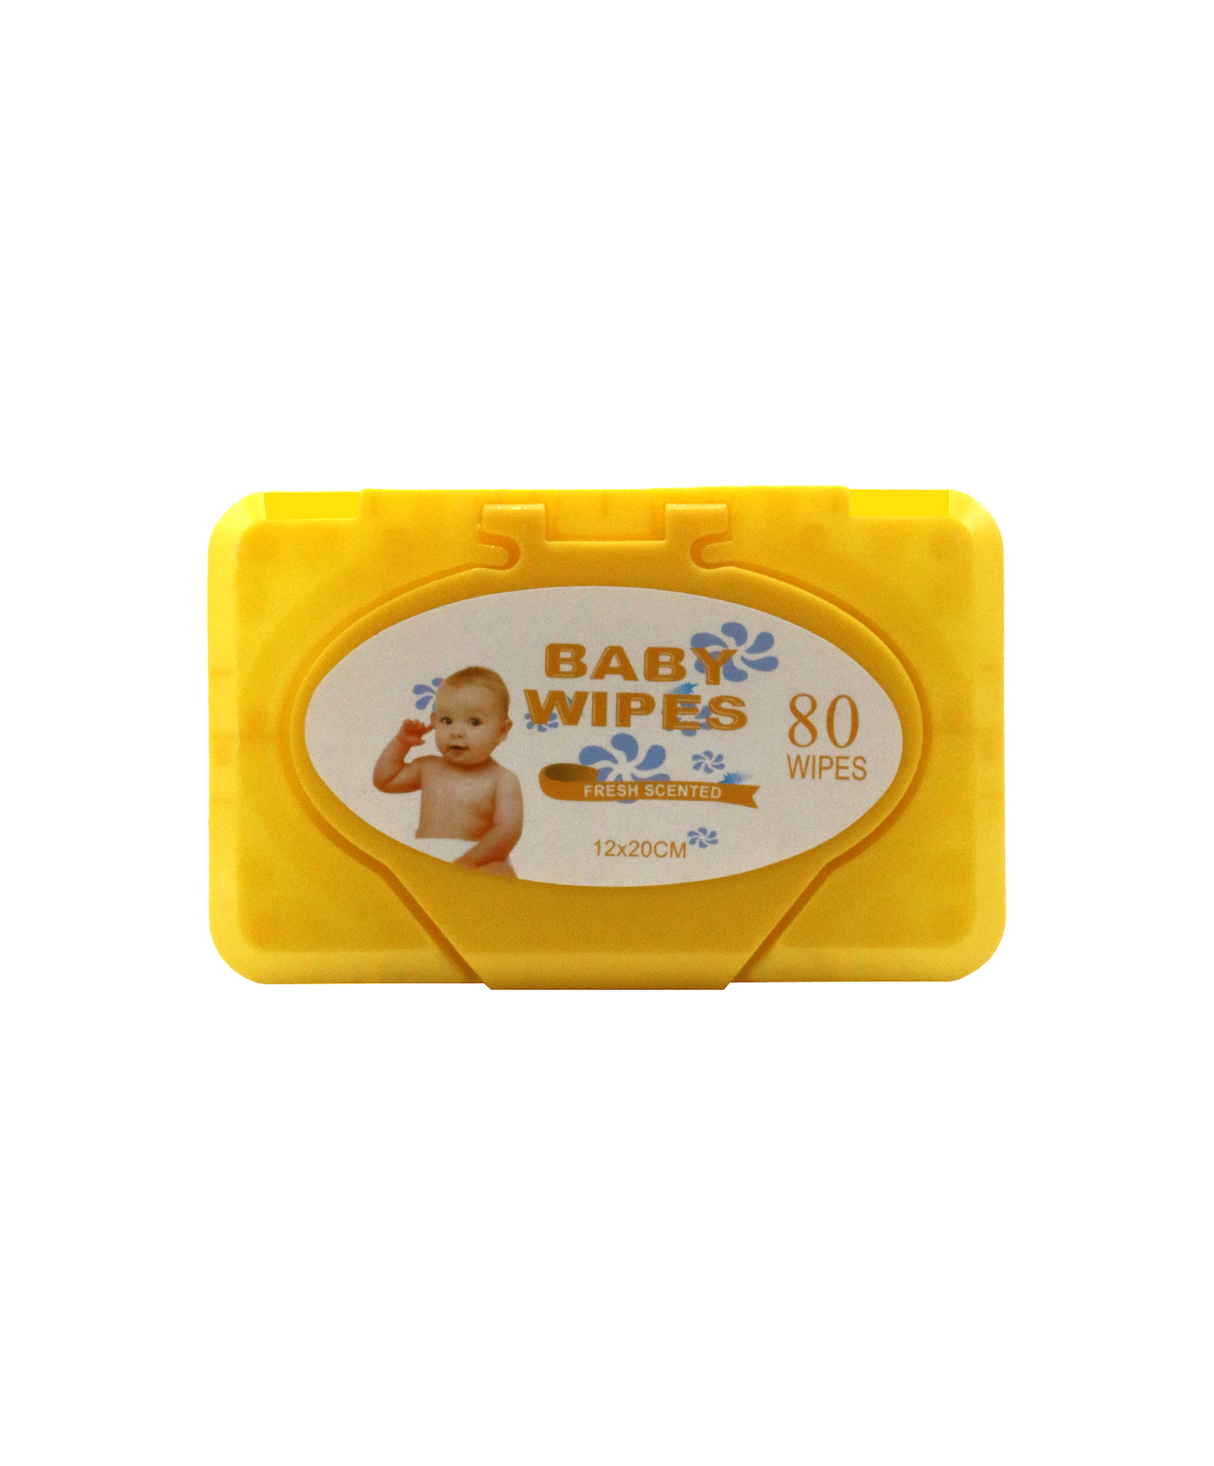 baby wipes fresh scented 80pc china kw4756